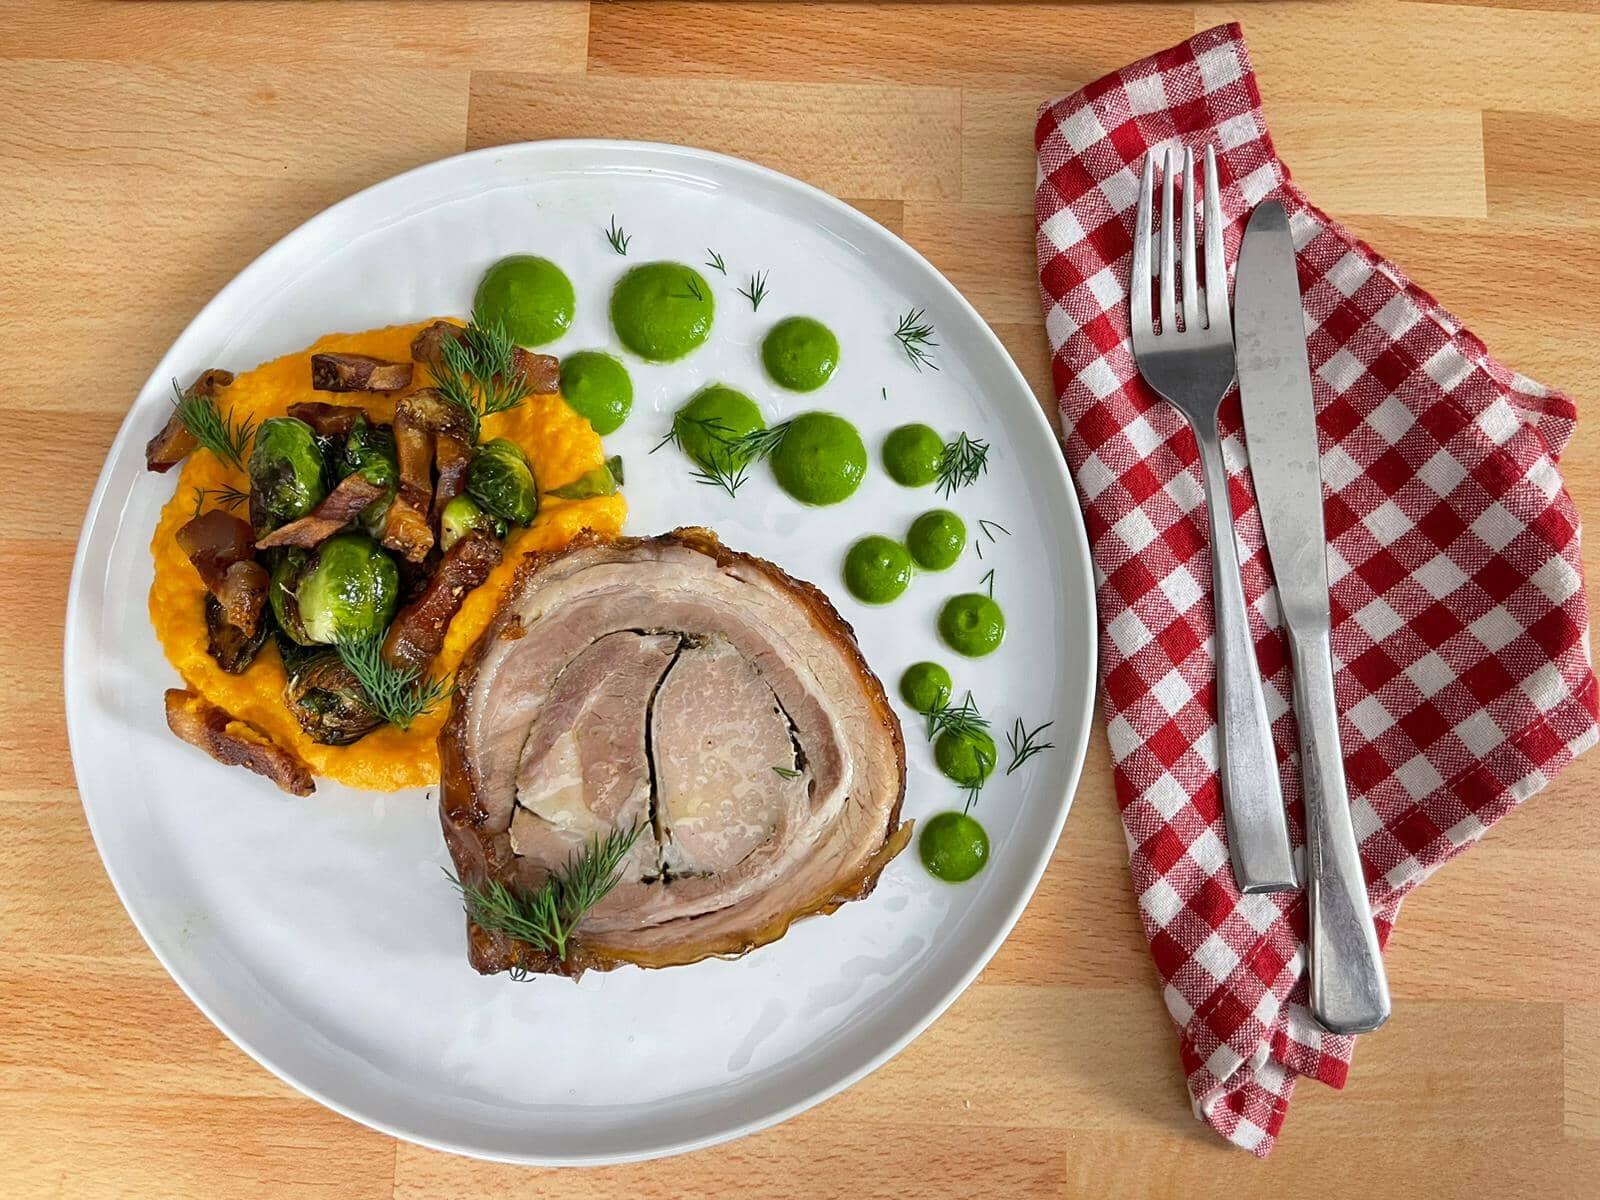 Roman Style Porchetta with guanciale, brussels sprouts, mashed sweet potatoes and salsa verde